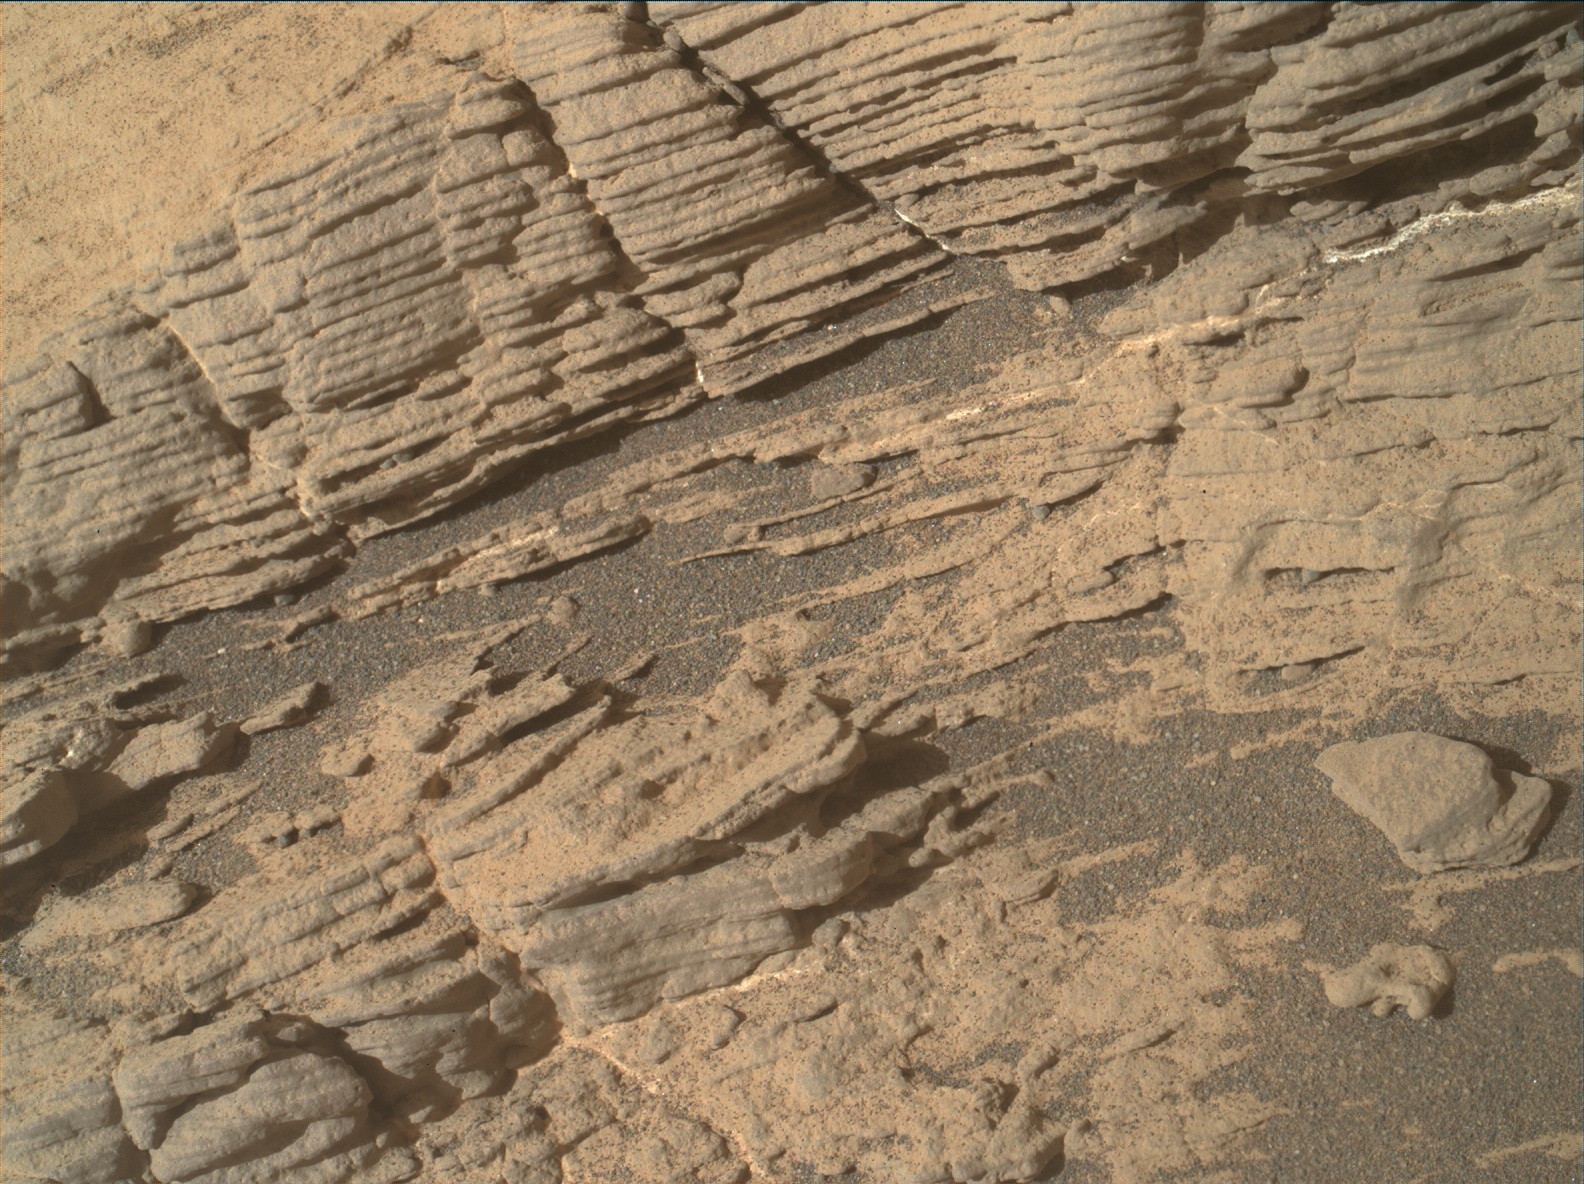 Nasa's Mars rover Curiosity acquired this image using its Mars Hand Lens Imager (MAHLI) on Sol 2448